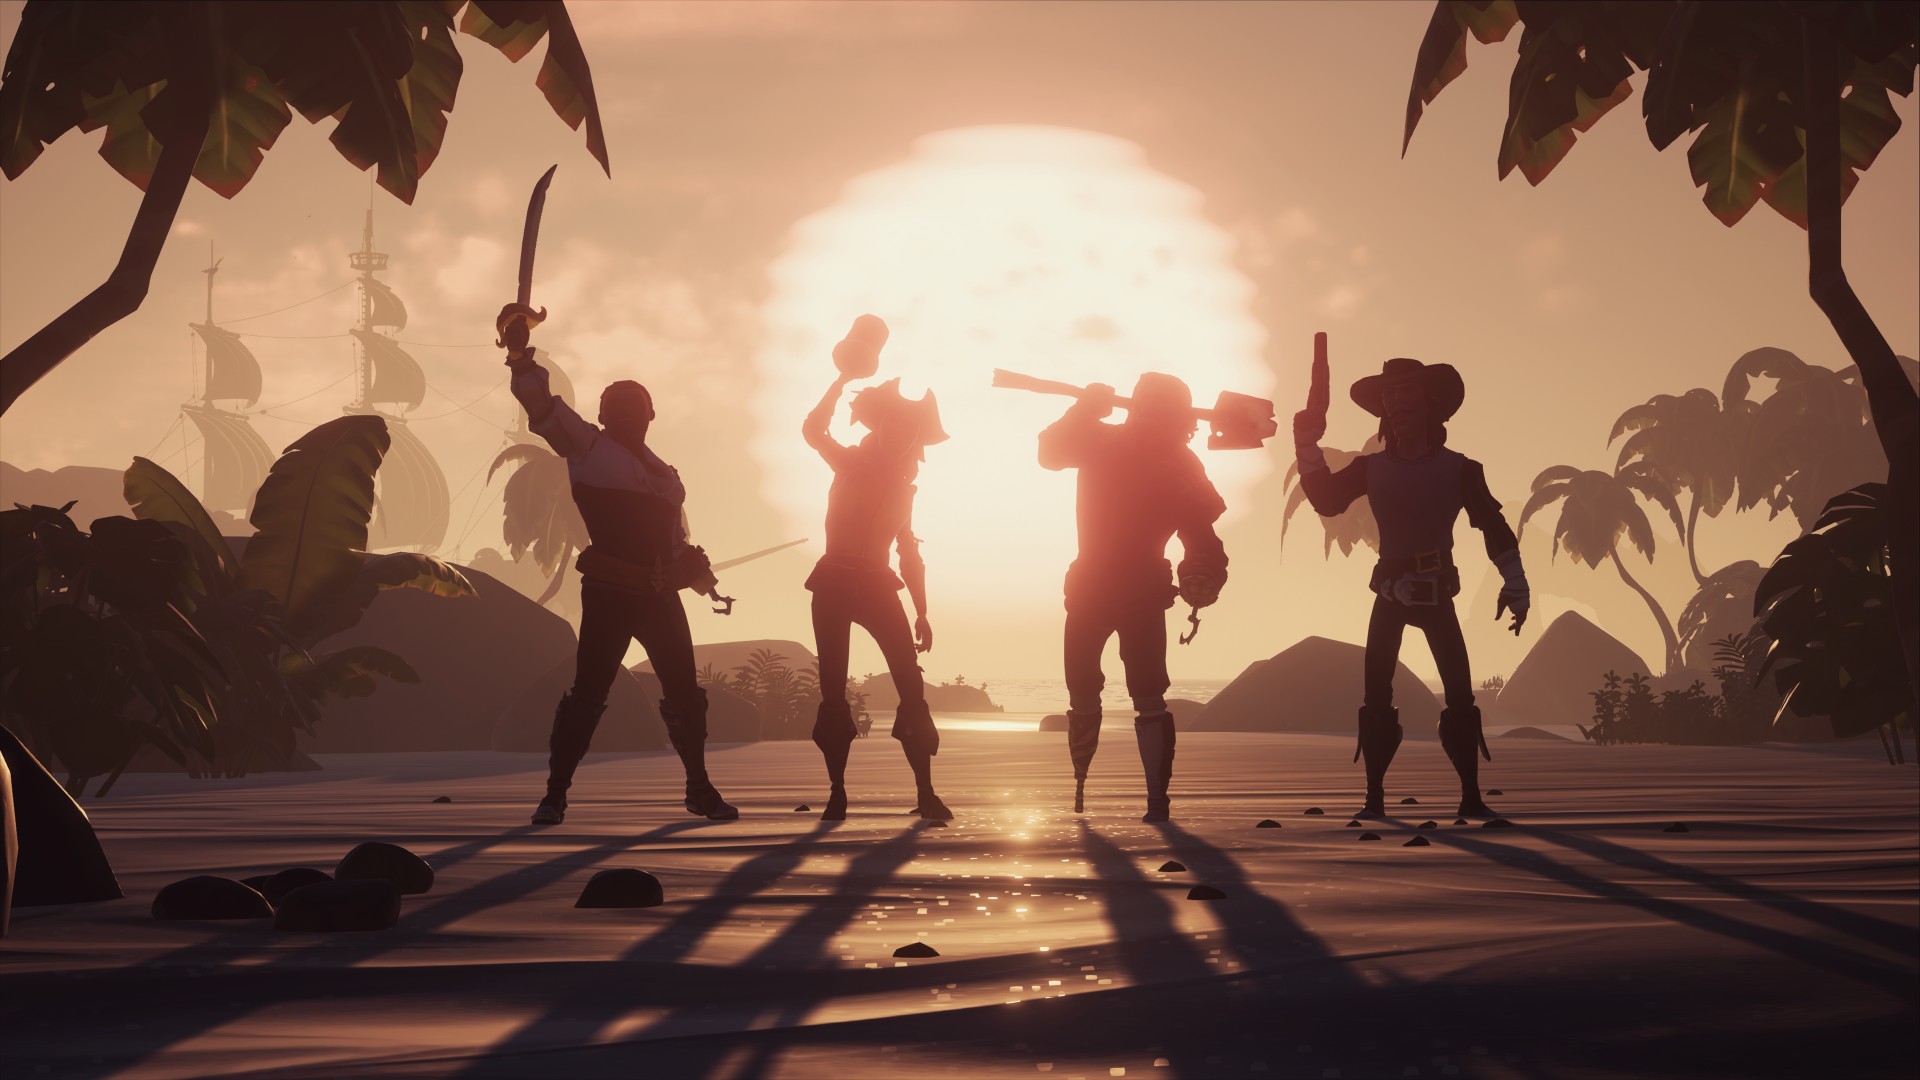 Set Sail with Sea of Thieves on Steam – Coming Soon